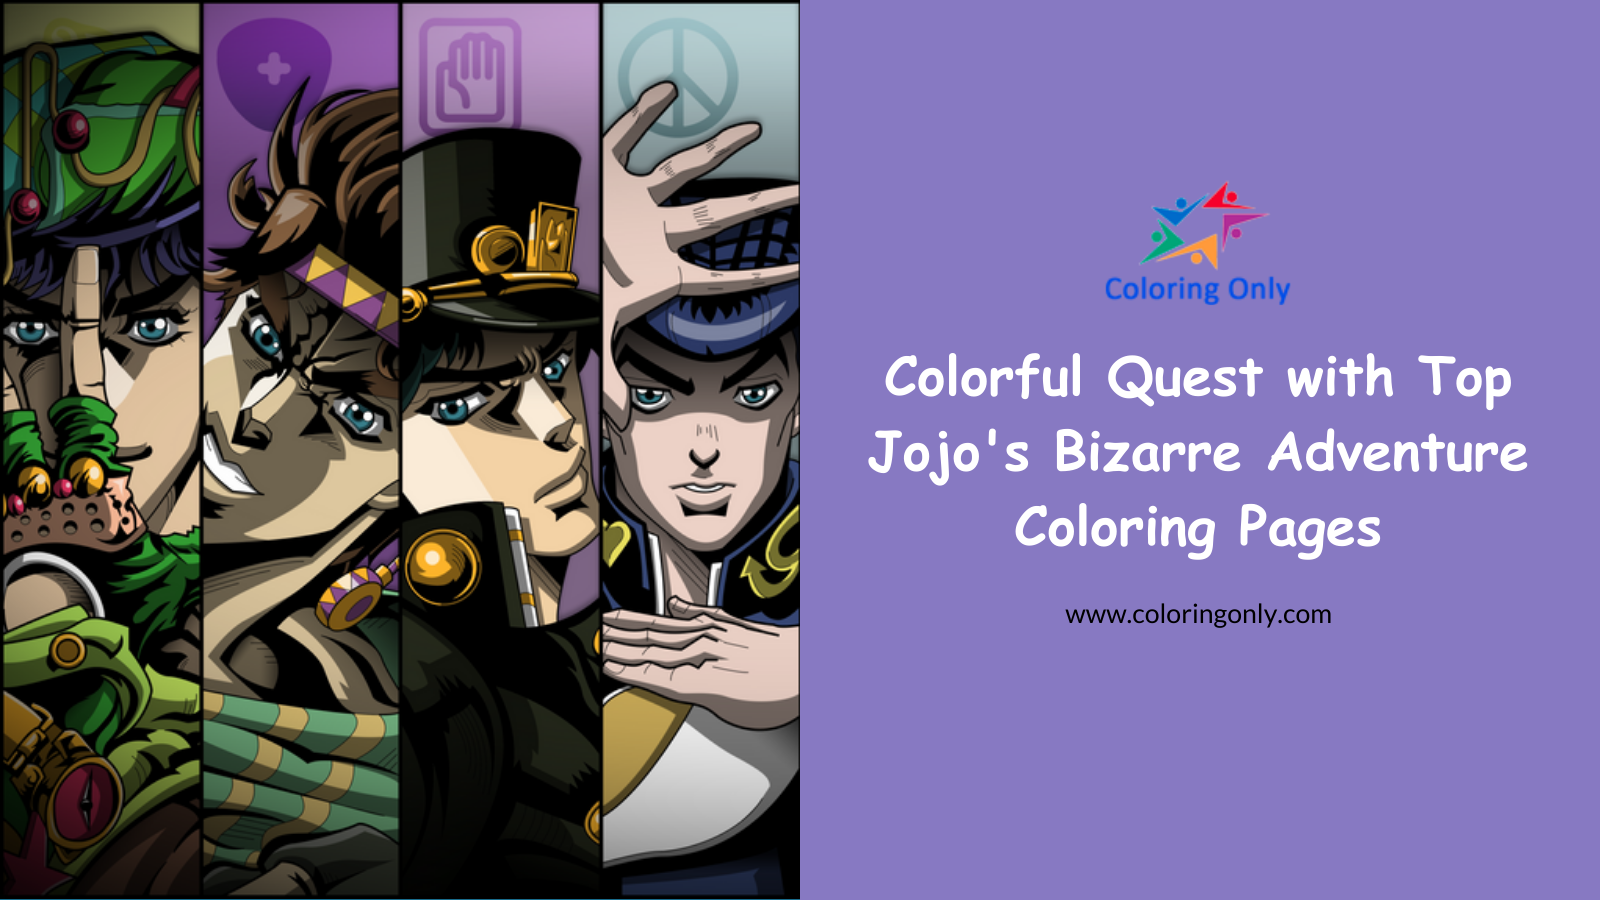 Colorful Quest with Top Jojo’s Bizarre Adventure Coloring Pages